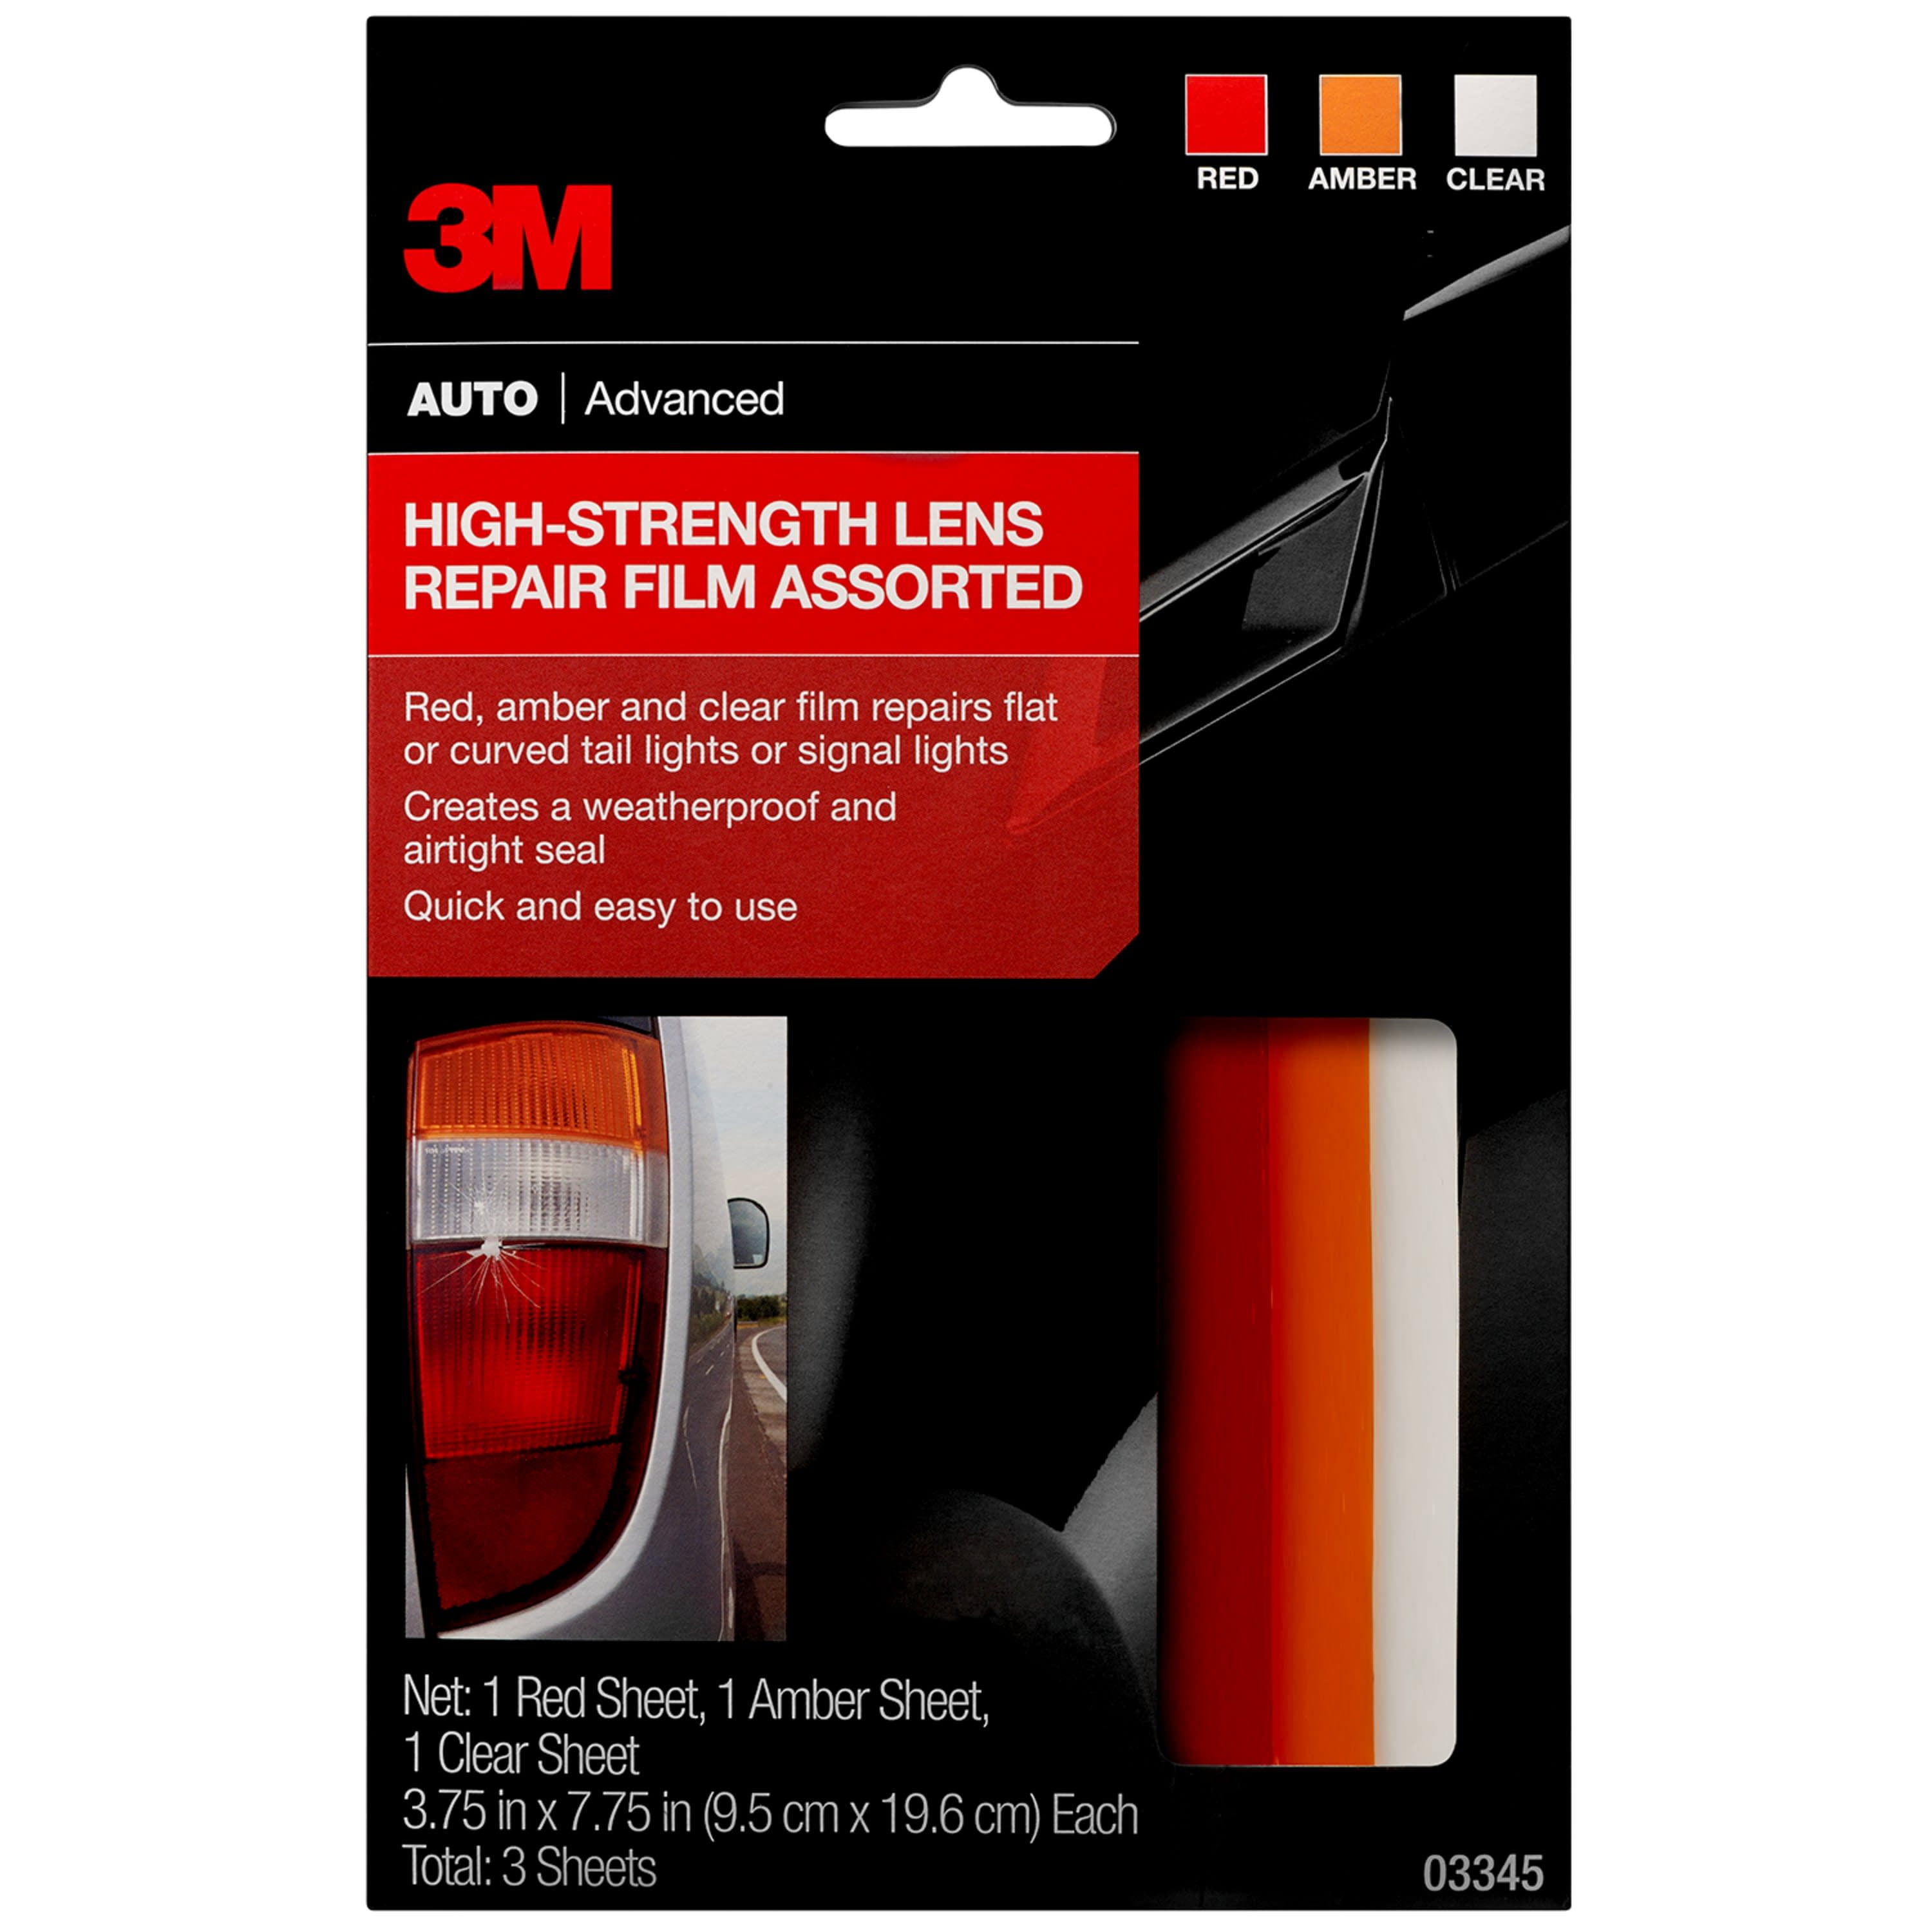 3M Auto Advanced Assorted High-Strength Lens Repair Film Sheets, 3 Count Pack